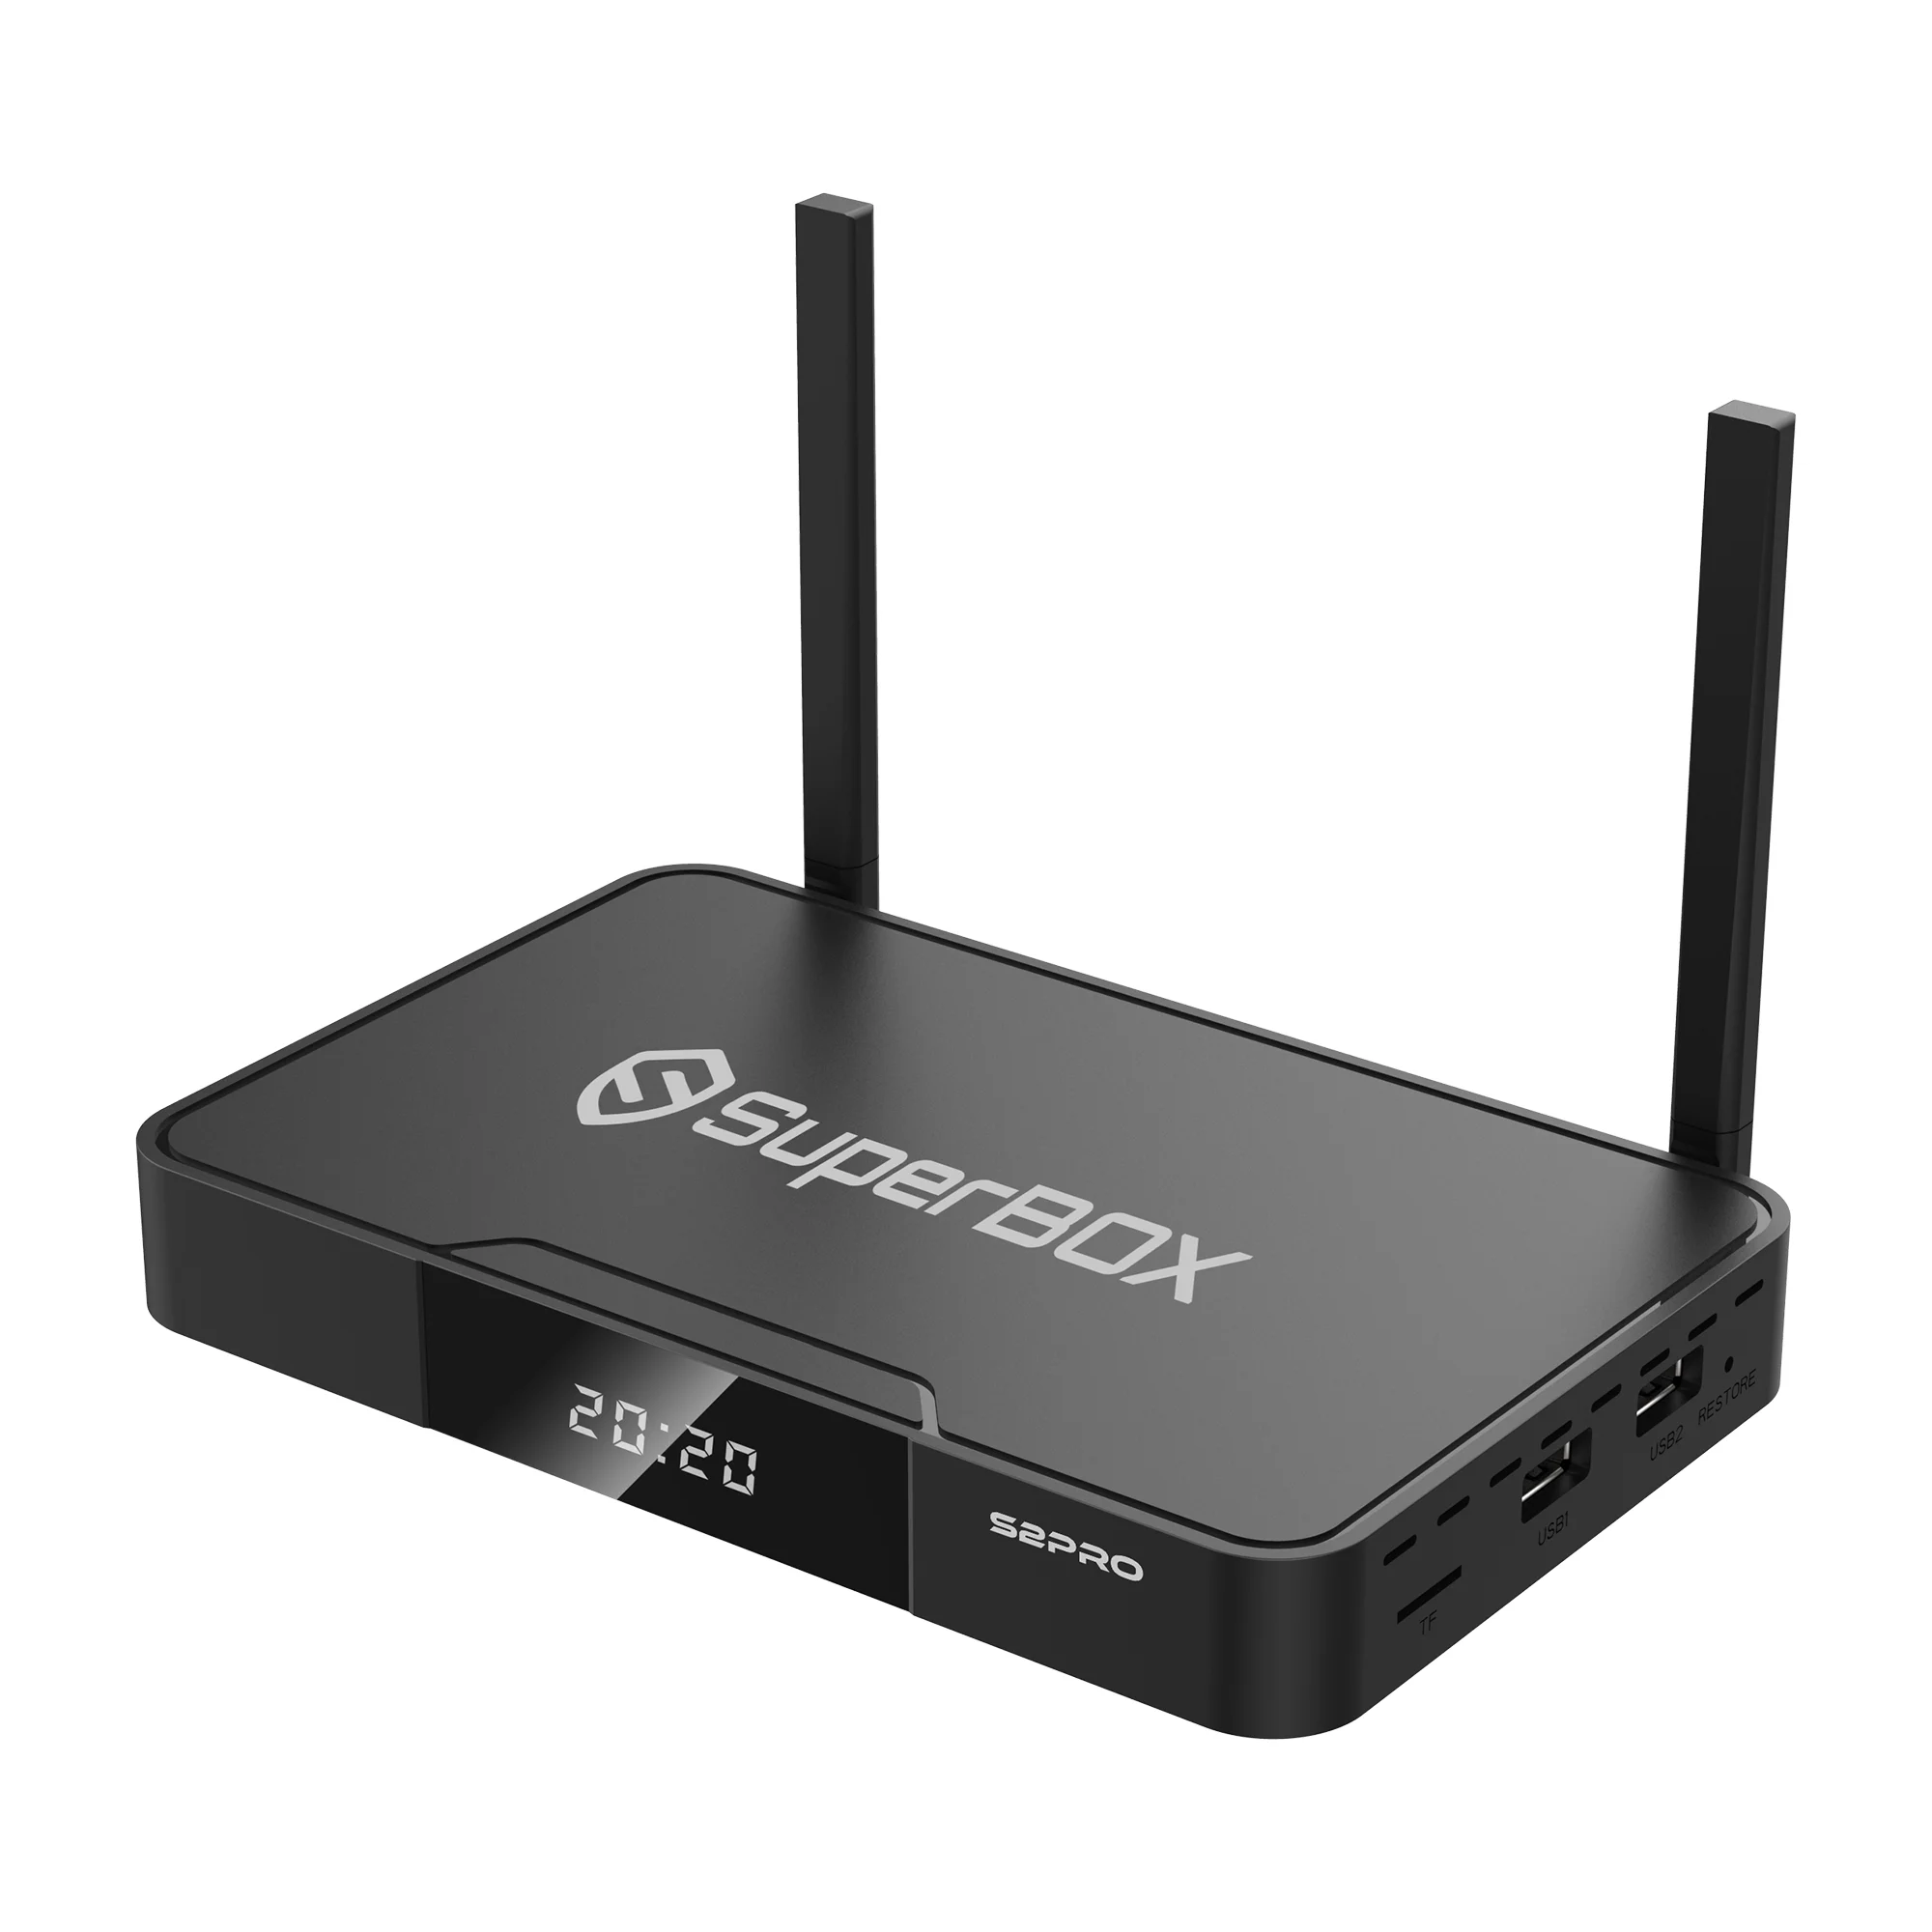 

2020 Best Hot Selling English Android Box TV Unlimited Free Use Superbox S2 Pro